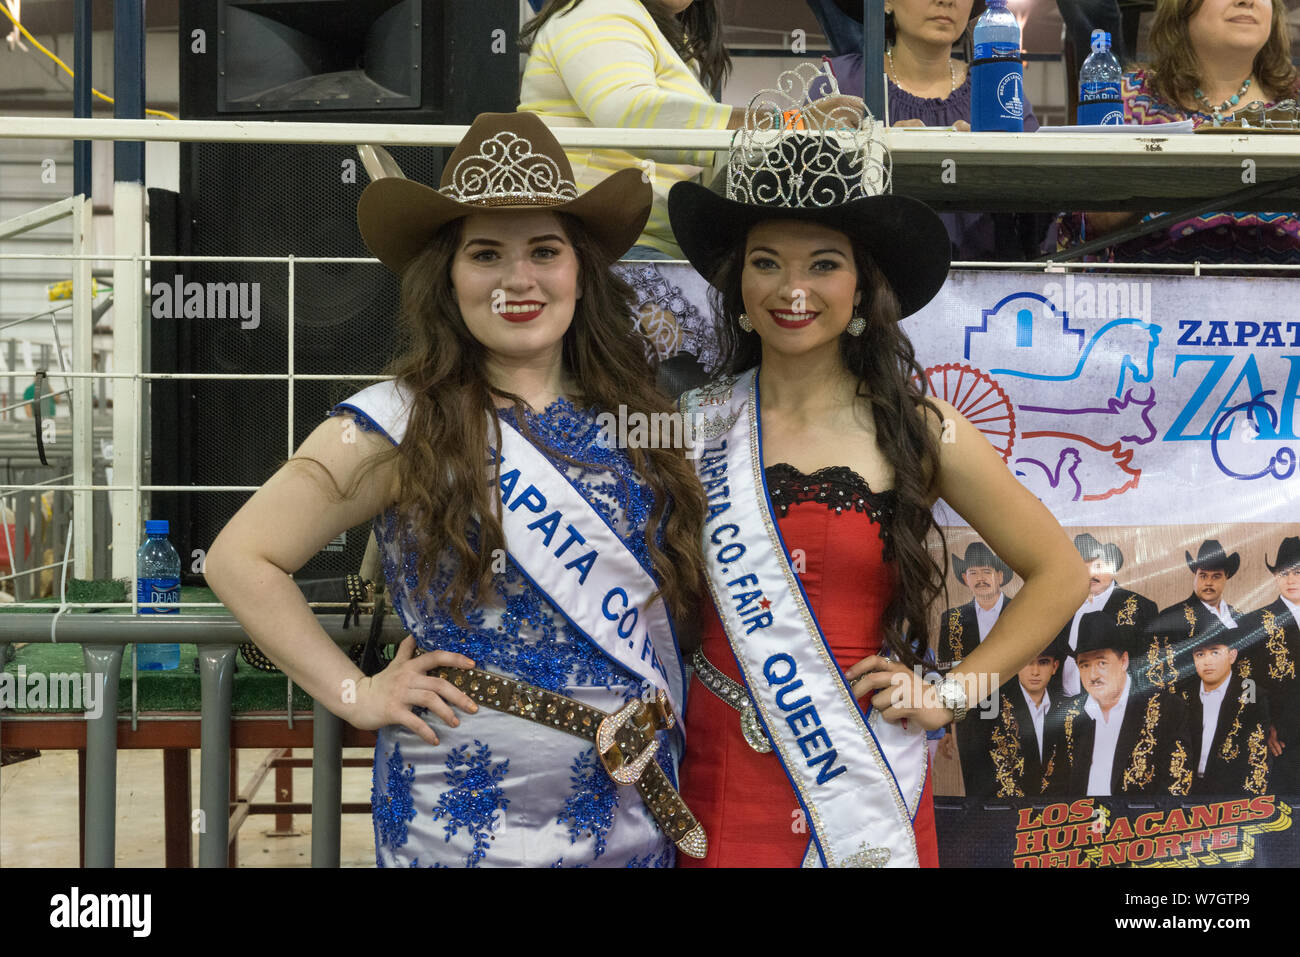 Beauty queens at the Zapata County Fair in Zapata, Texas Stock Photo